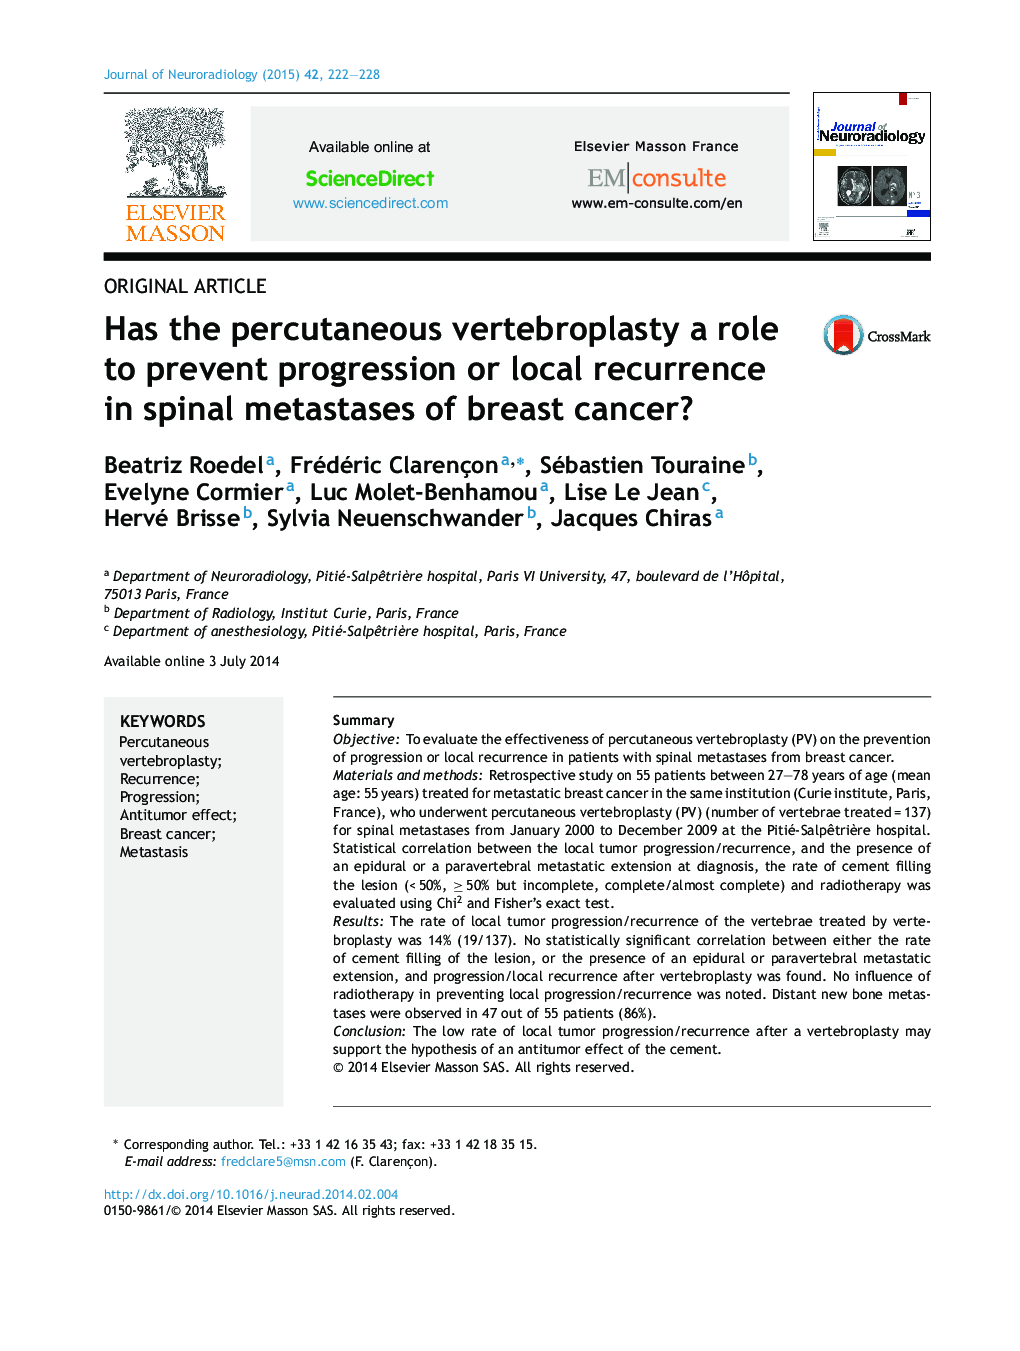 Has the percutaneous vertebroplasty a role to prevent progression or local recurrence in spinal metastases of breast cancer?